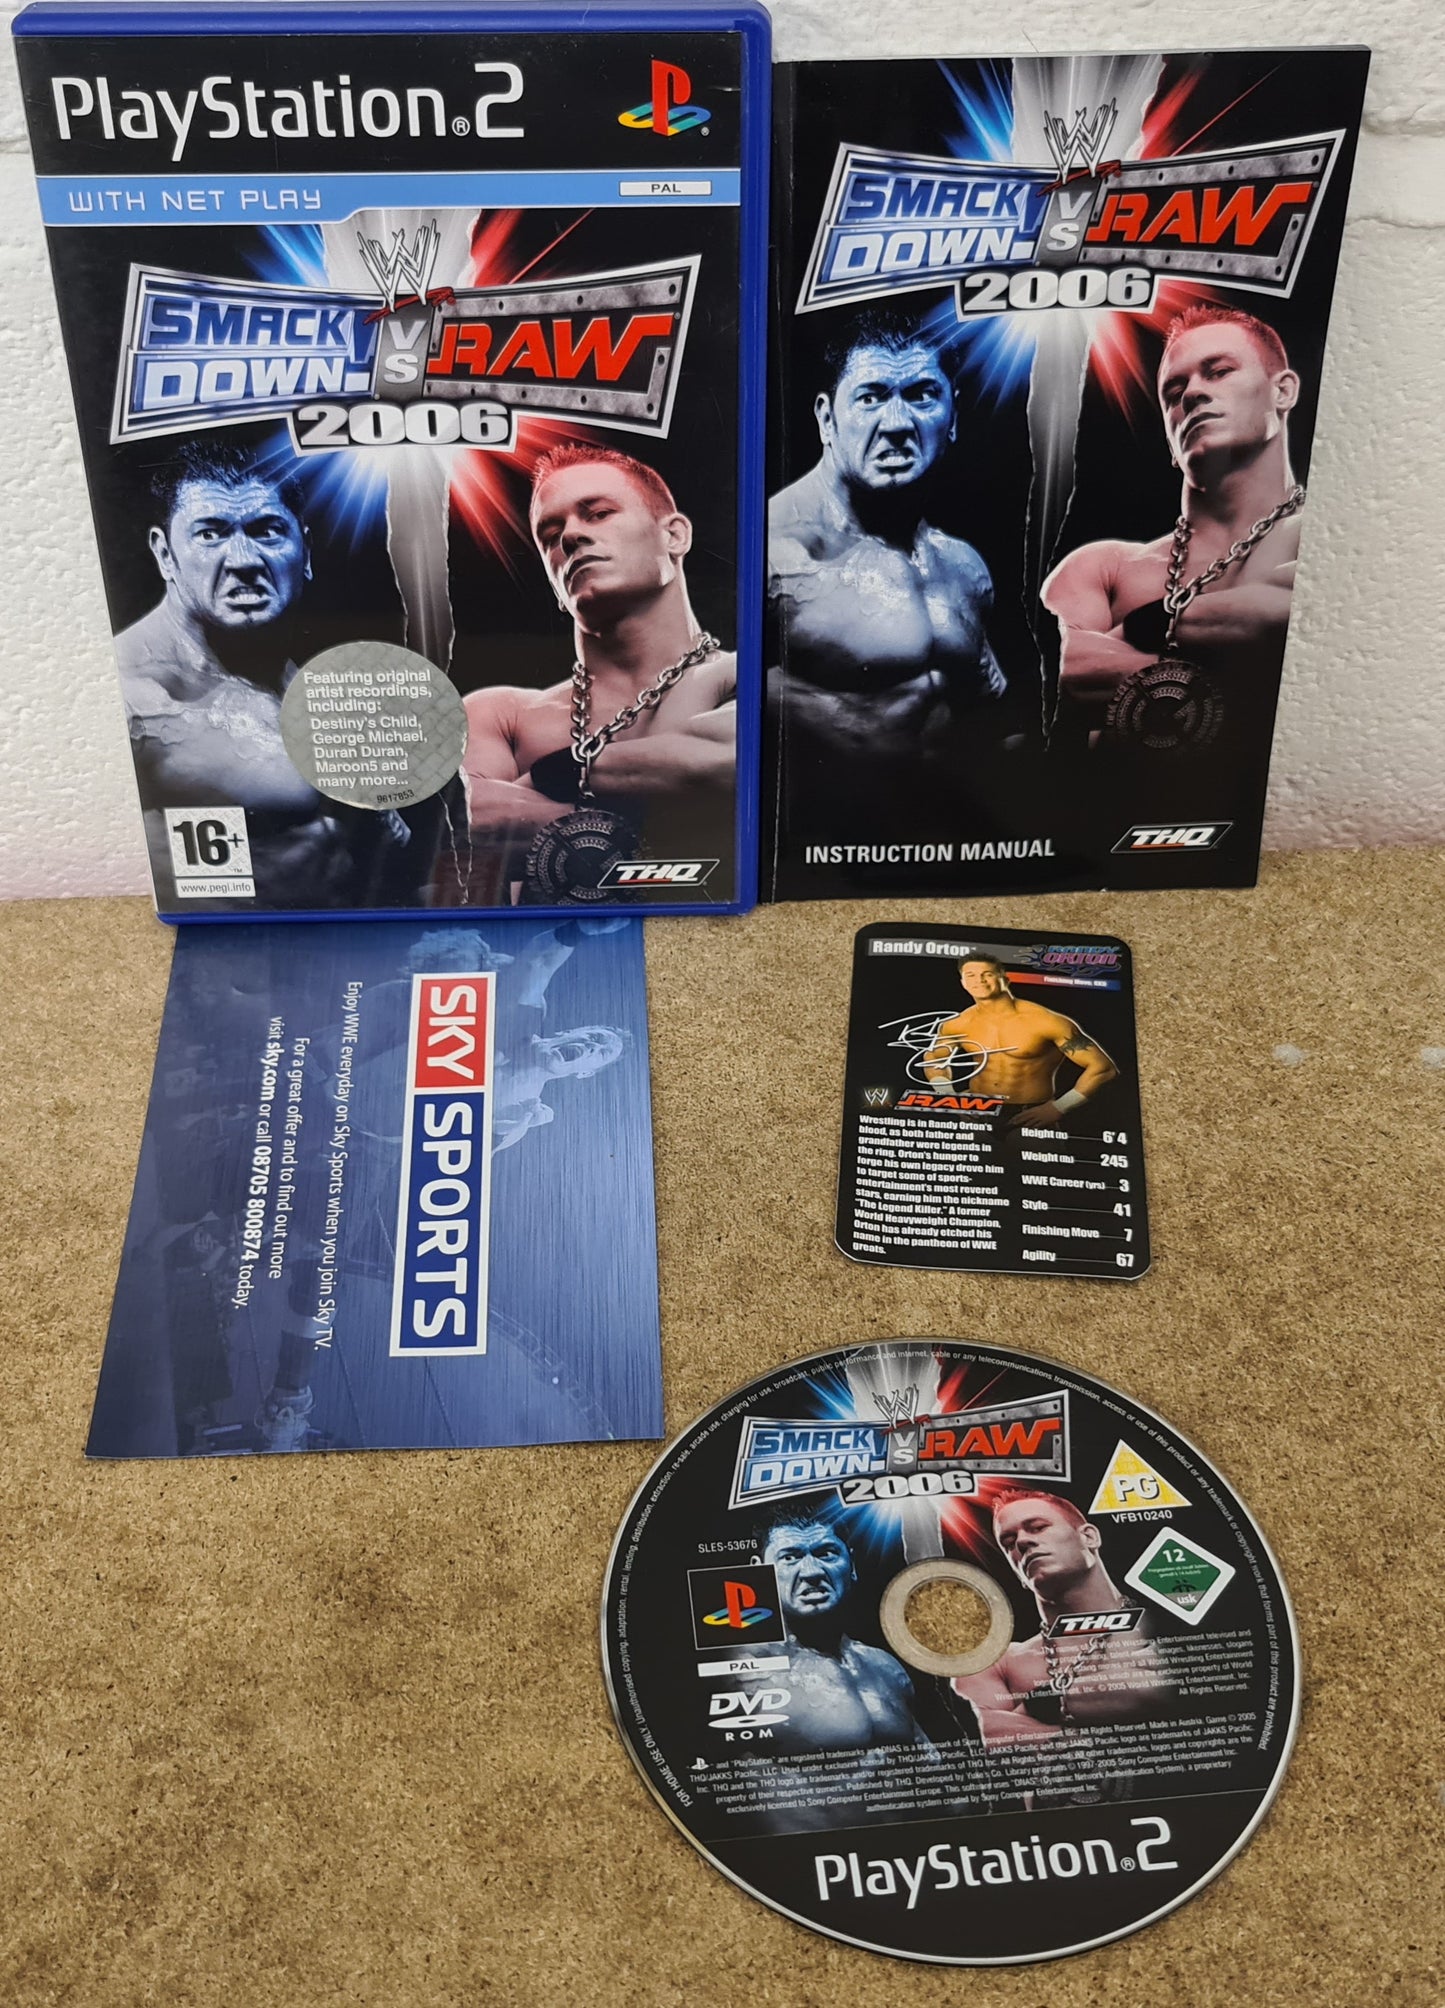 WWE Smackdown Vs Raw 2006 with RARE Top Trump Card Sony Playstation 2 (PS2) Game